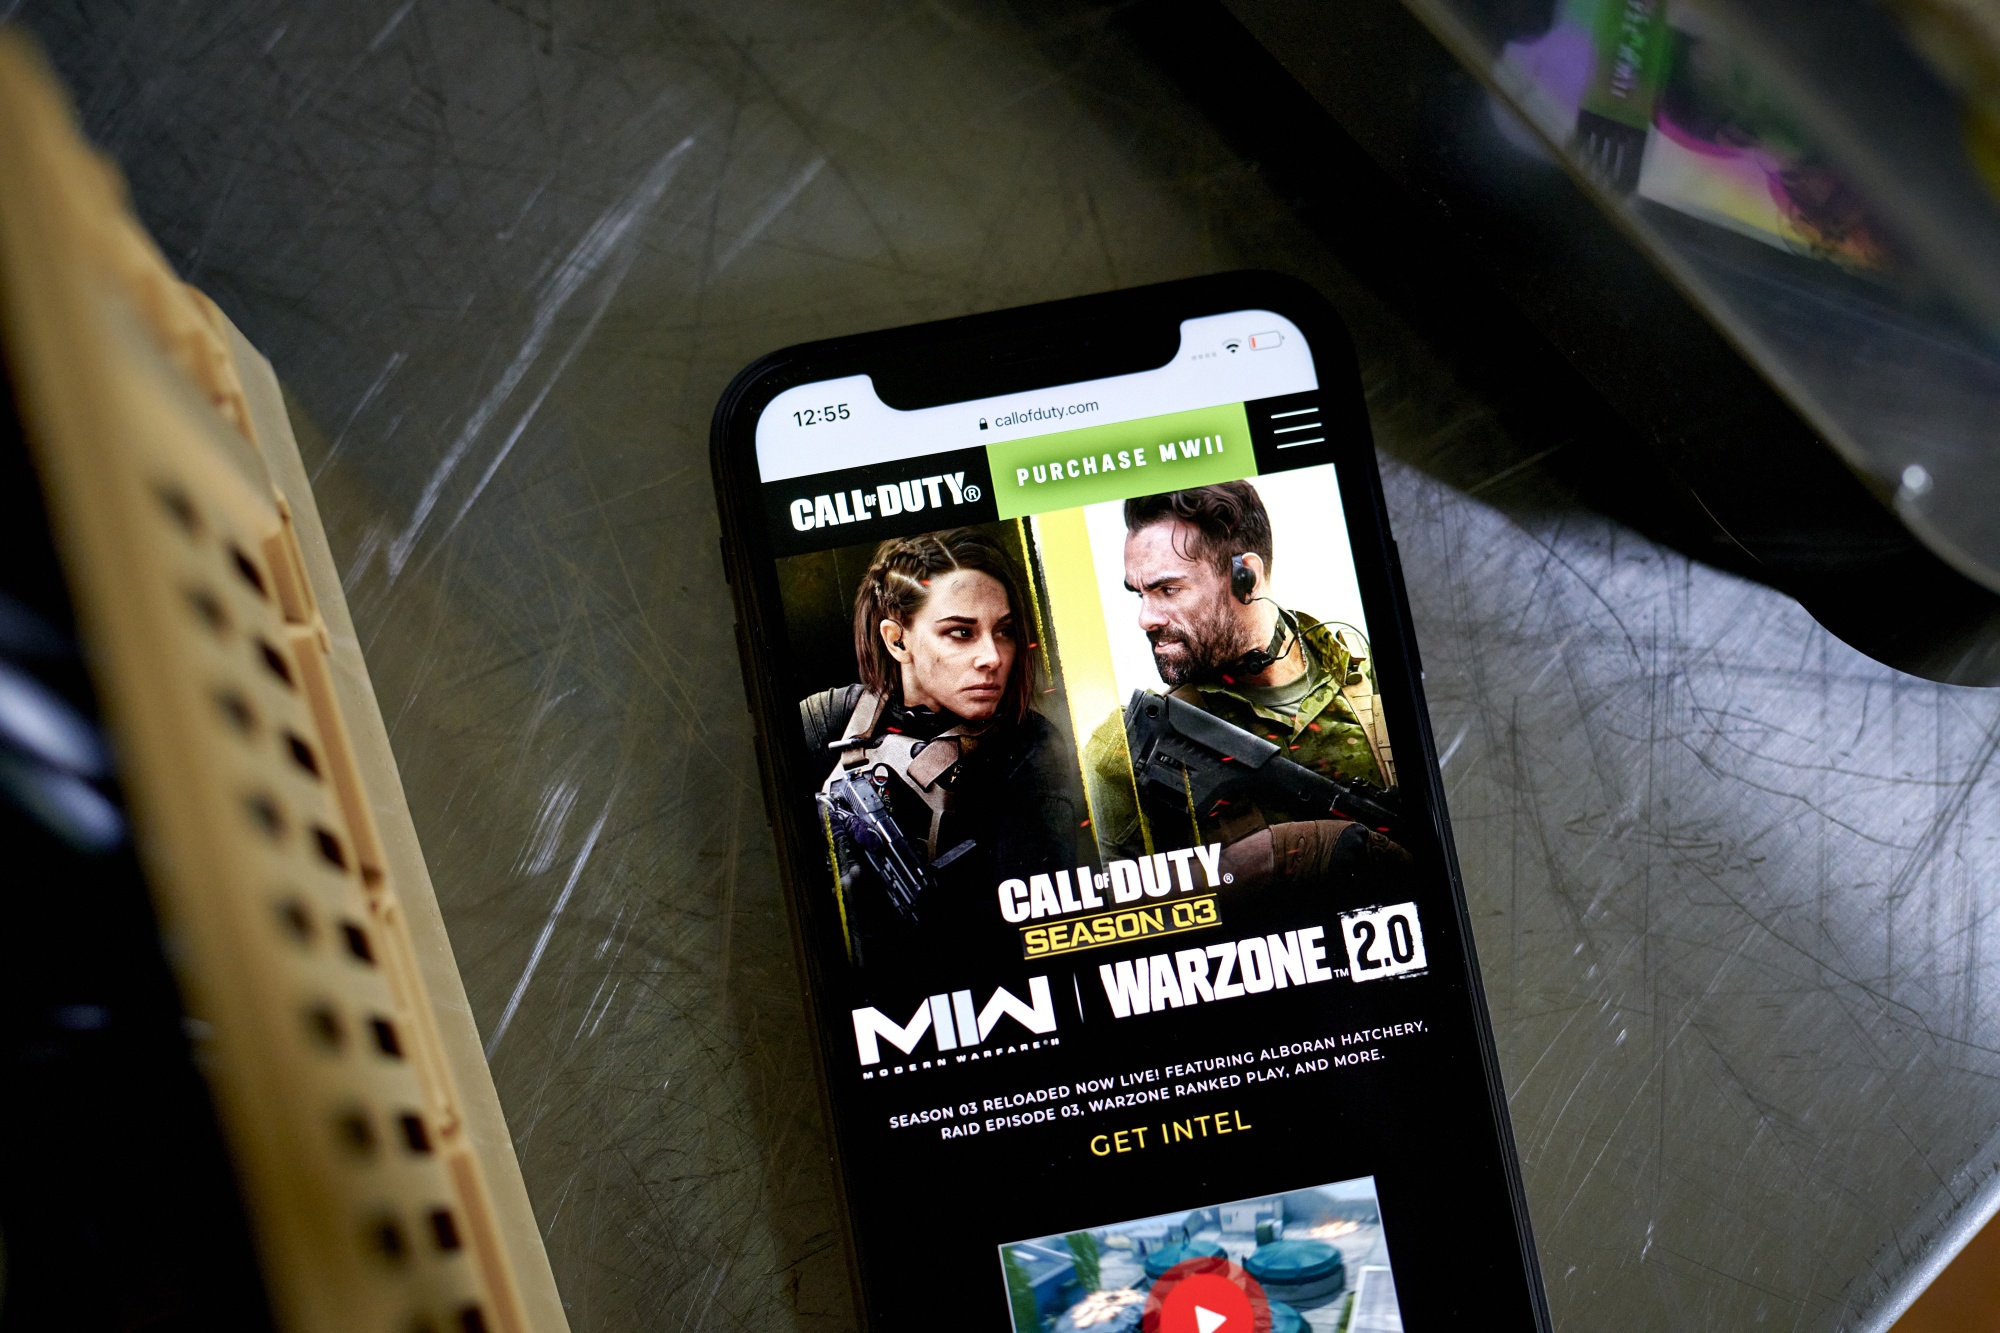 Microsoft attempts to pick apart US legal argument against deal to buy  Activision